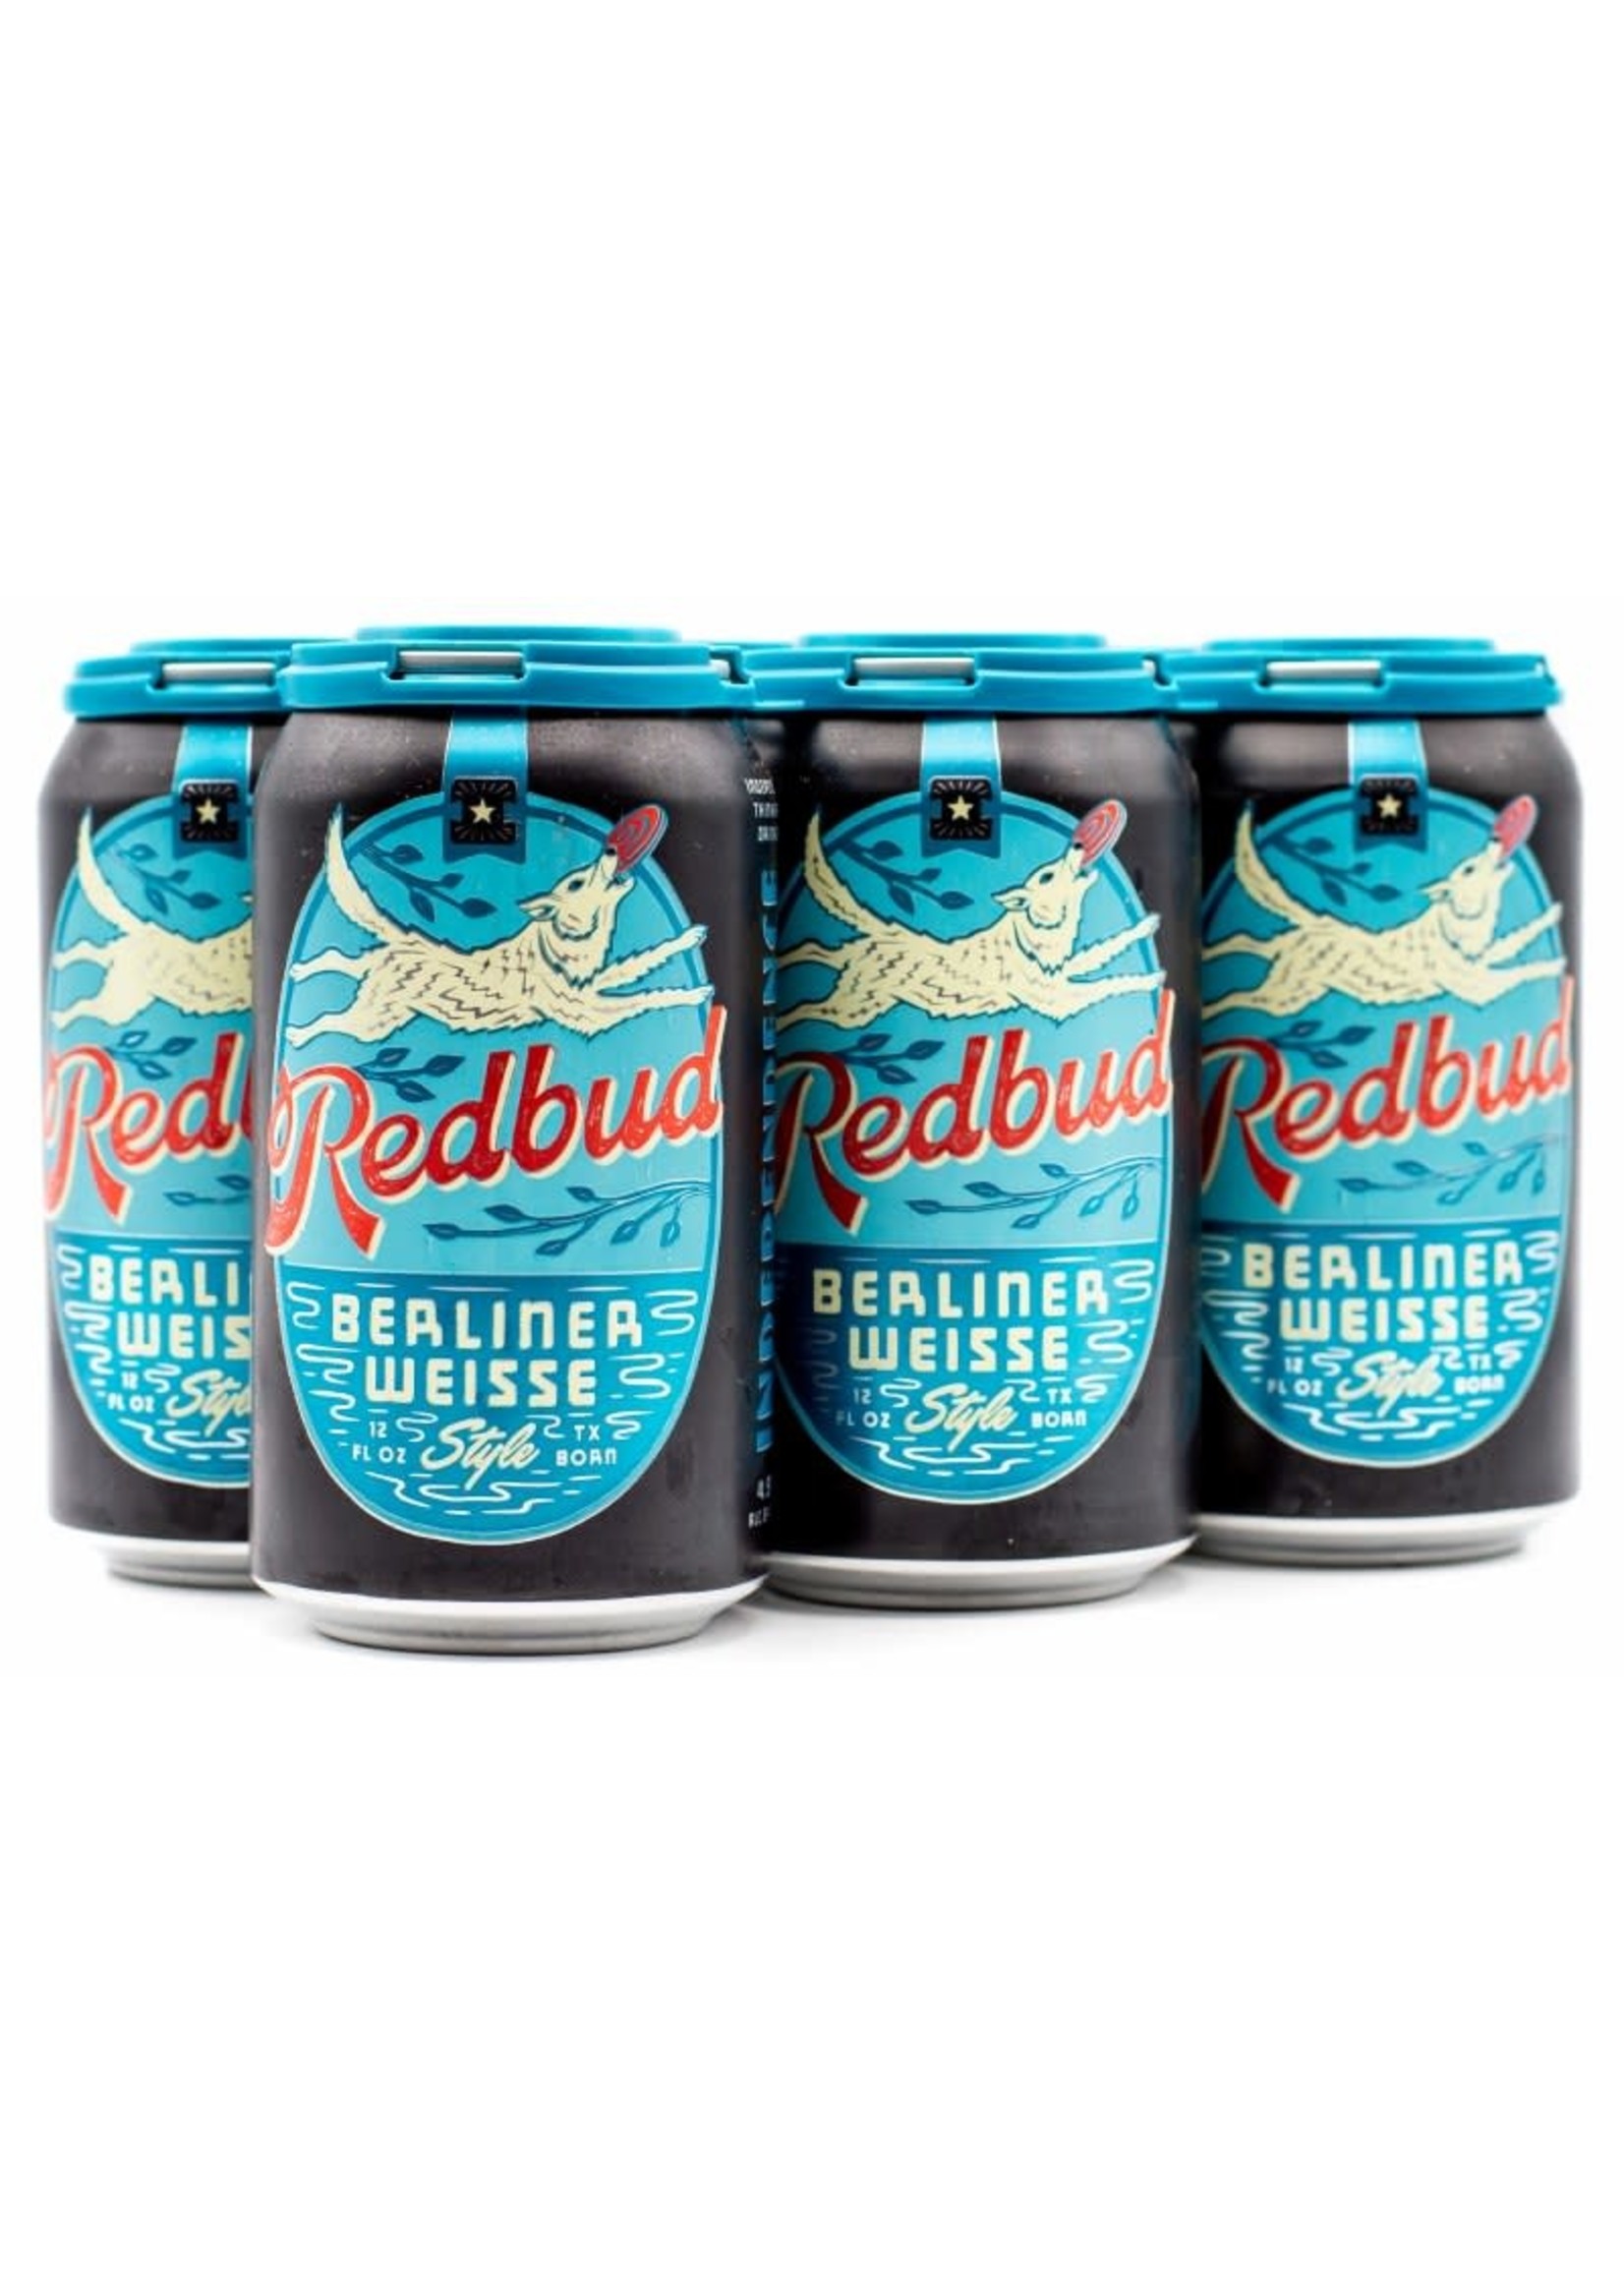 Independence India Red Bud 6pk 12oz Cans